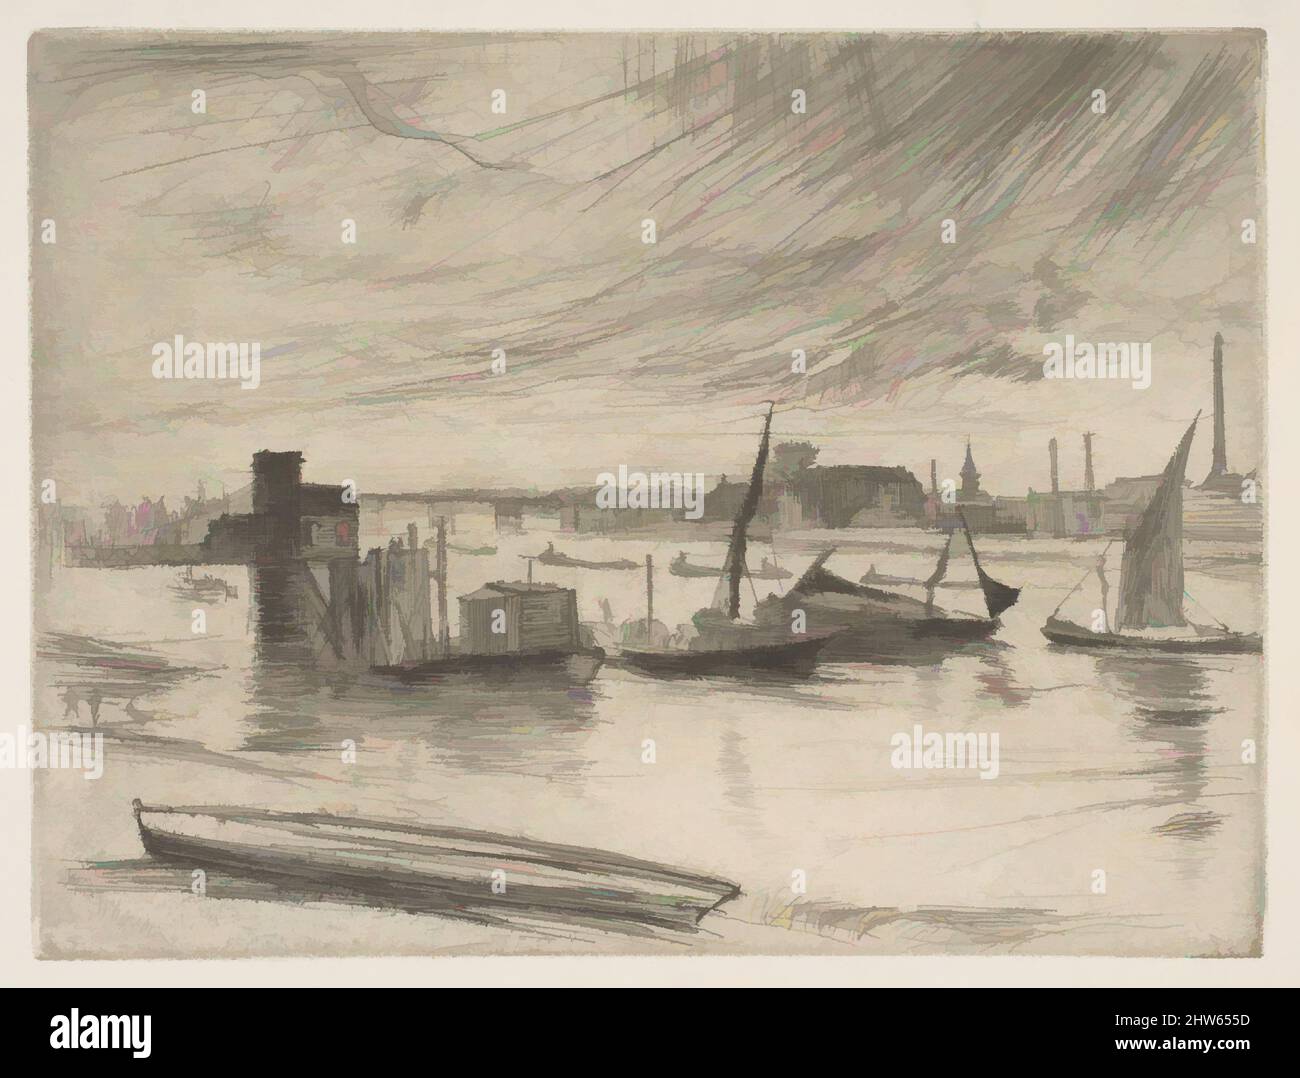 Art inspired by Early Morning, Battersea (Battersea Dawn) (Cadogan Pier), 1861, Etching and drypoint; second state of two (Glasgow); printed in black ink on ivory laid paper, plate: 4 1/2 x 5 7/8 in. (11.4 x 14.9 cm), Prints, James McNeill Whistler (American, Lowell, Massachusetts 1834, Classic works modernized by Artotop with a splash of modernity. Shapes, color and value, eye-catching visual impact on art. Emotions through freedom of artworks in a contemporary way. A timeless message pursuing a wildly creative new direction. Artists turning to the digital medium and creating the Artotop NFT Stock Photo